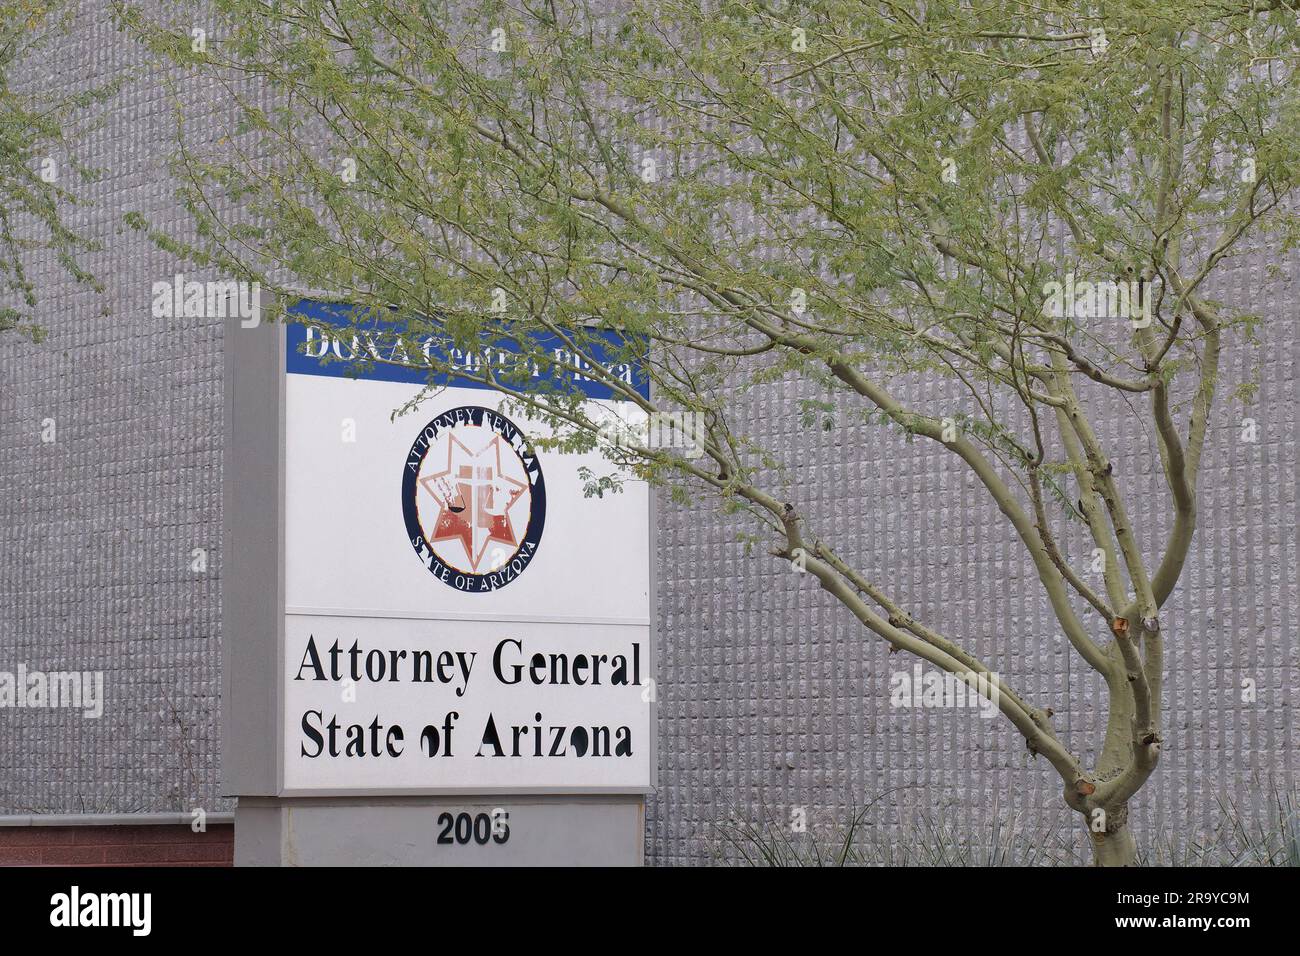 Phoenix, AZ - March 16, 2023: Offices for the Attorney General for the State of Arizona are at the DOXA Central Plaza at 2005 North Central Ave. Stock Photo